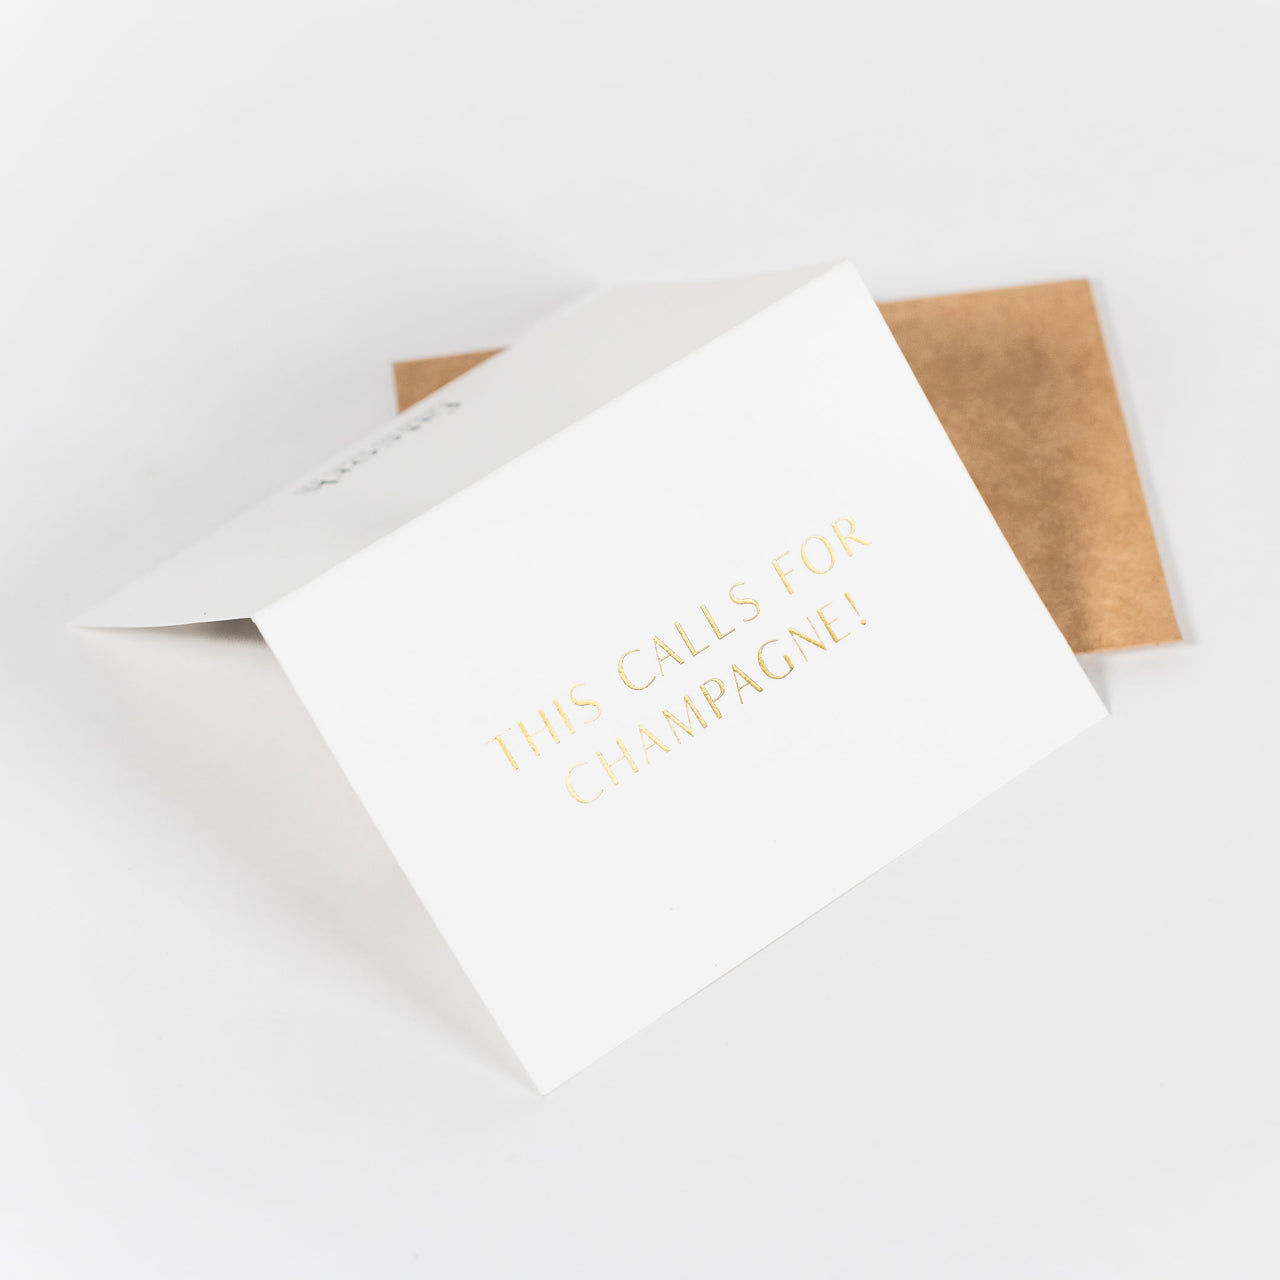 This Calls for Champagne card